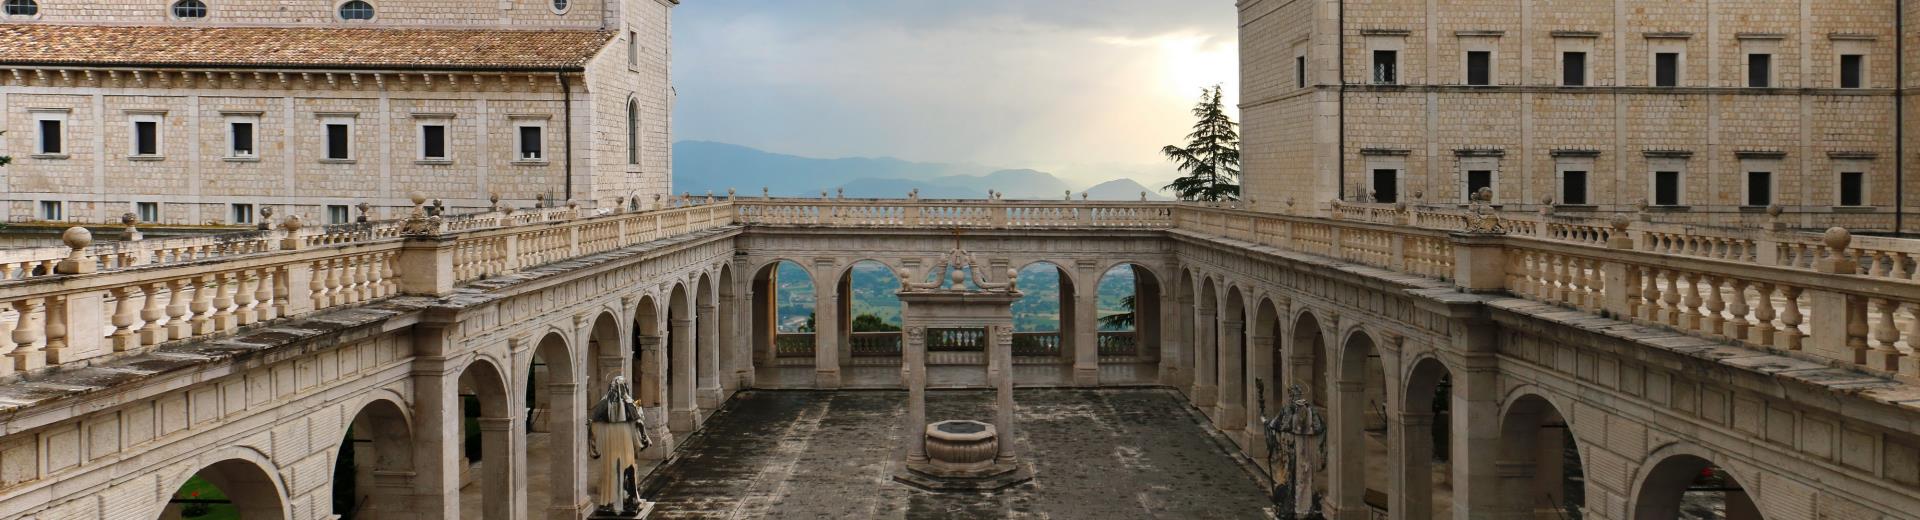 Follow the advice of the best Western Hotel Rocca and discover the beauty of the Abbey of Montecassino